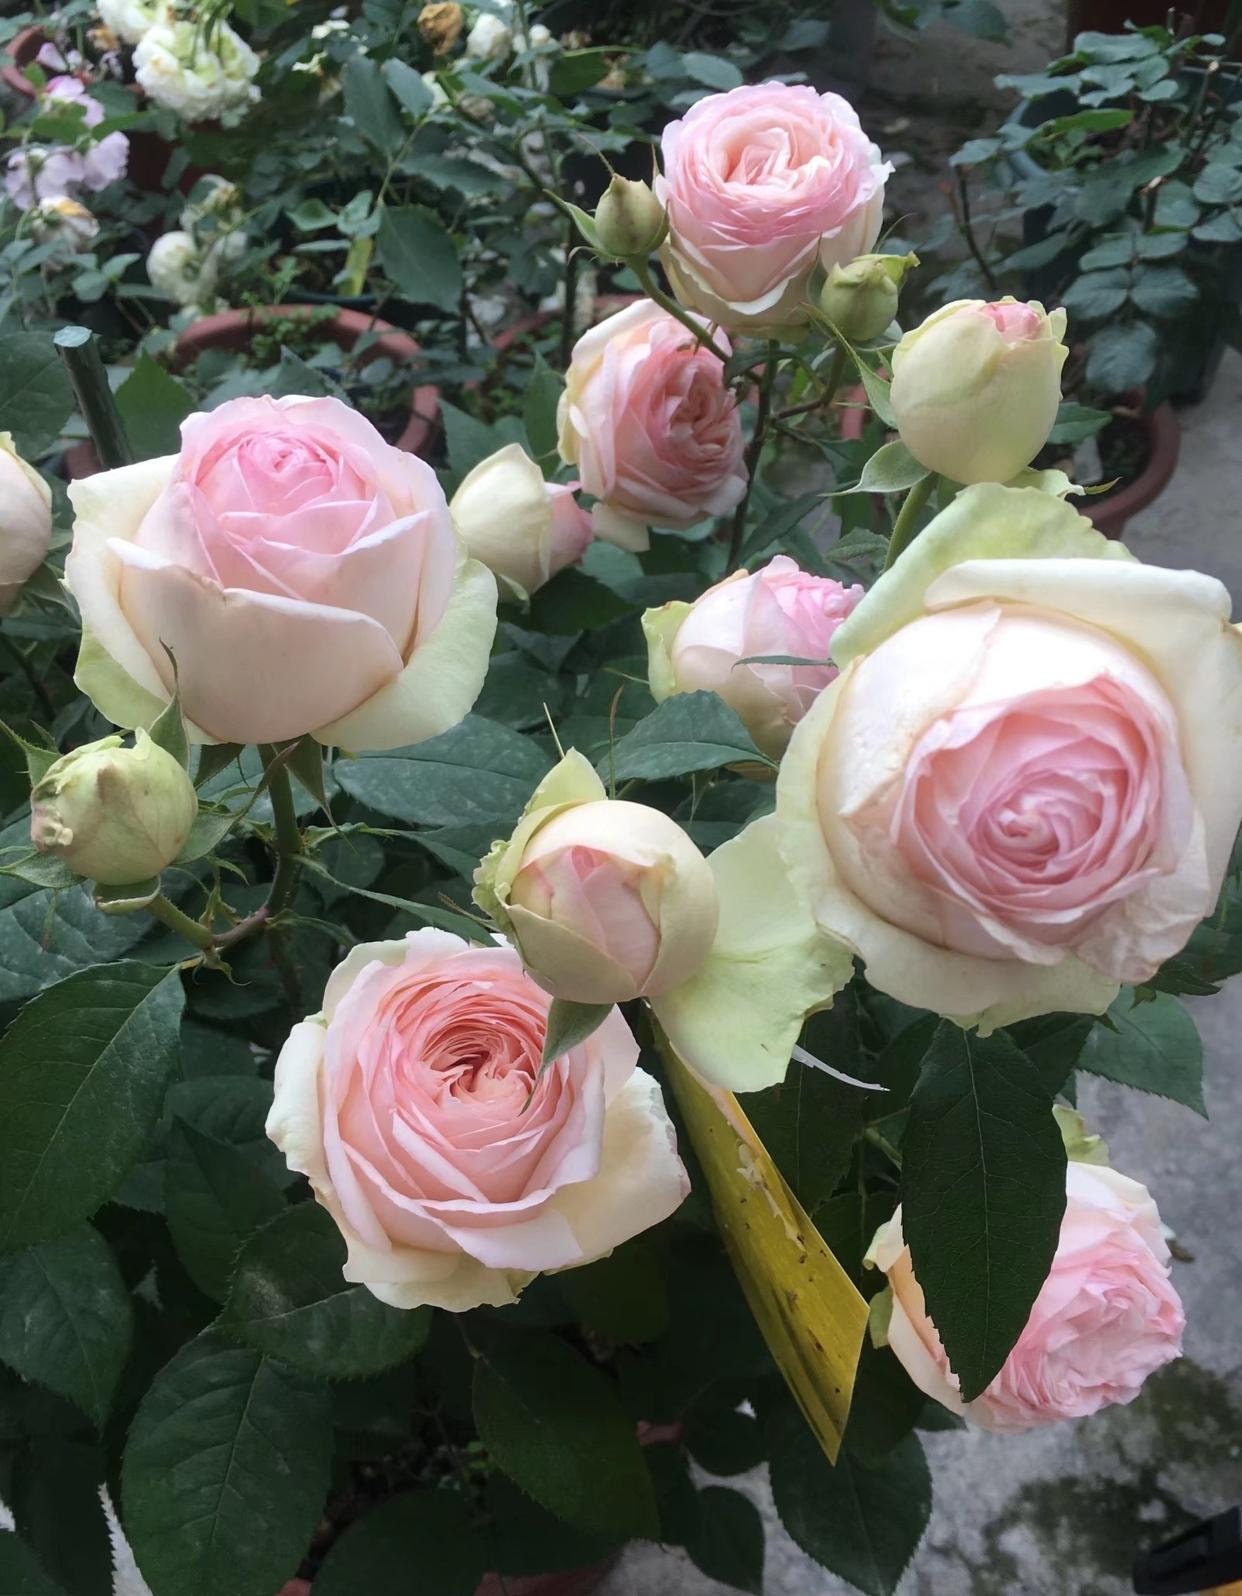 Rose【Mona Lisa| モナリザ 】-1.5Gal OwnRoot LivePlant｜Shrub -Eden｜蒙娜丽莎| Perfect| Redolent| Less Thorns| Heat Resistant | Easy 2 Glow| FloristsRosa